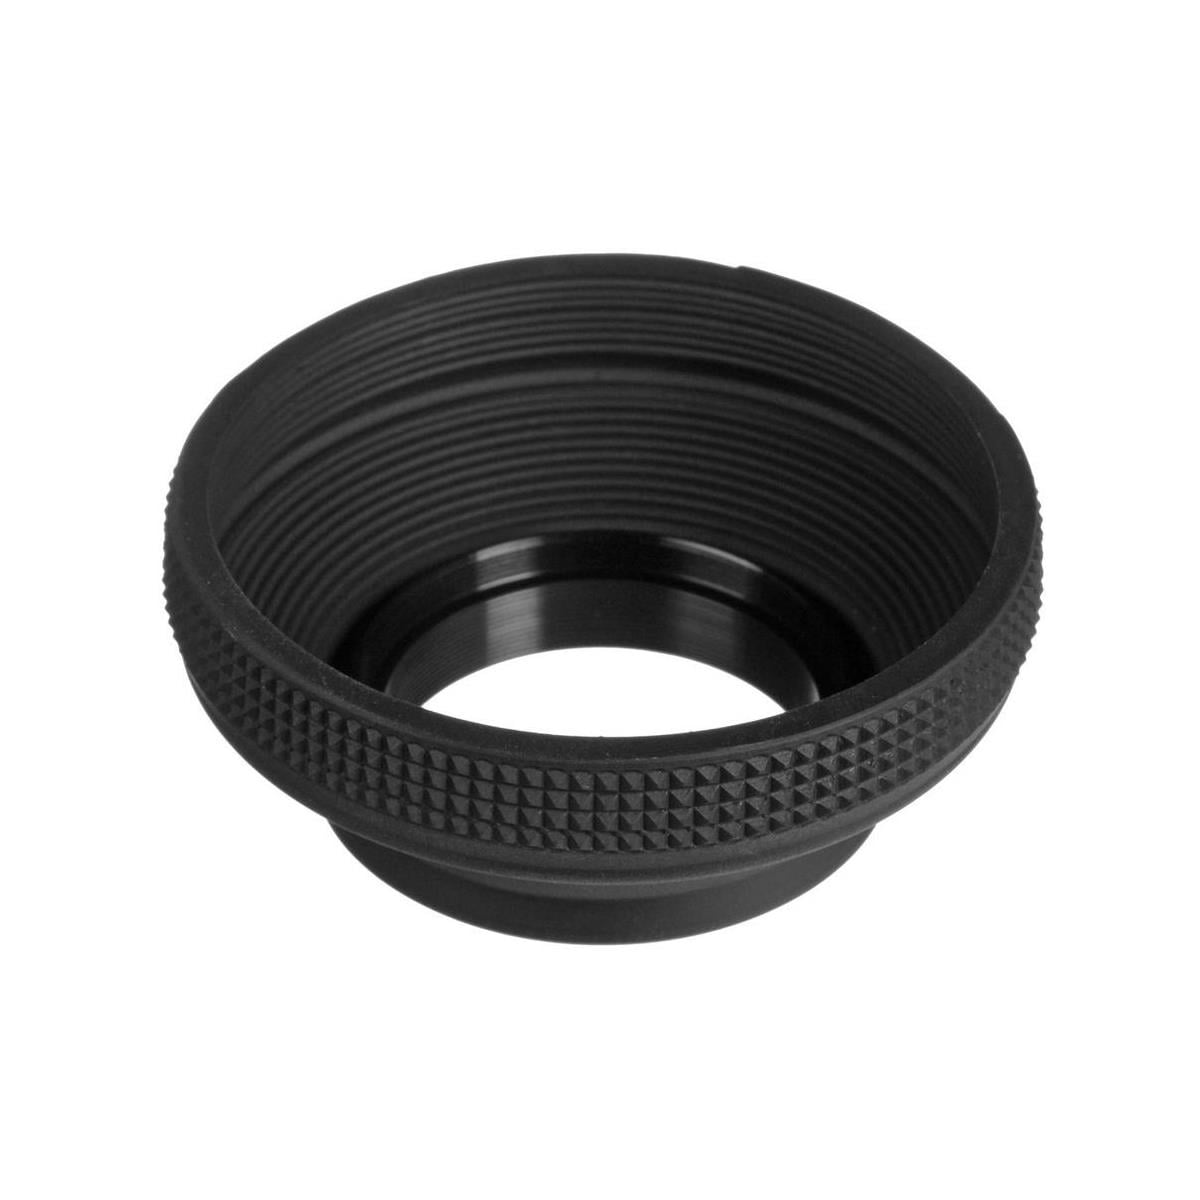 Rubber Collapsible Design Lens Shade for Sony Cyber-Shot DSC-RX10 IV 72mm 